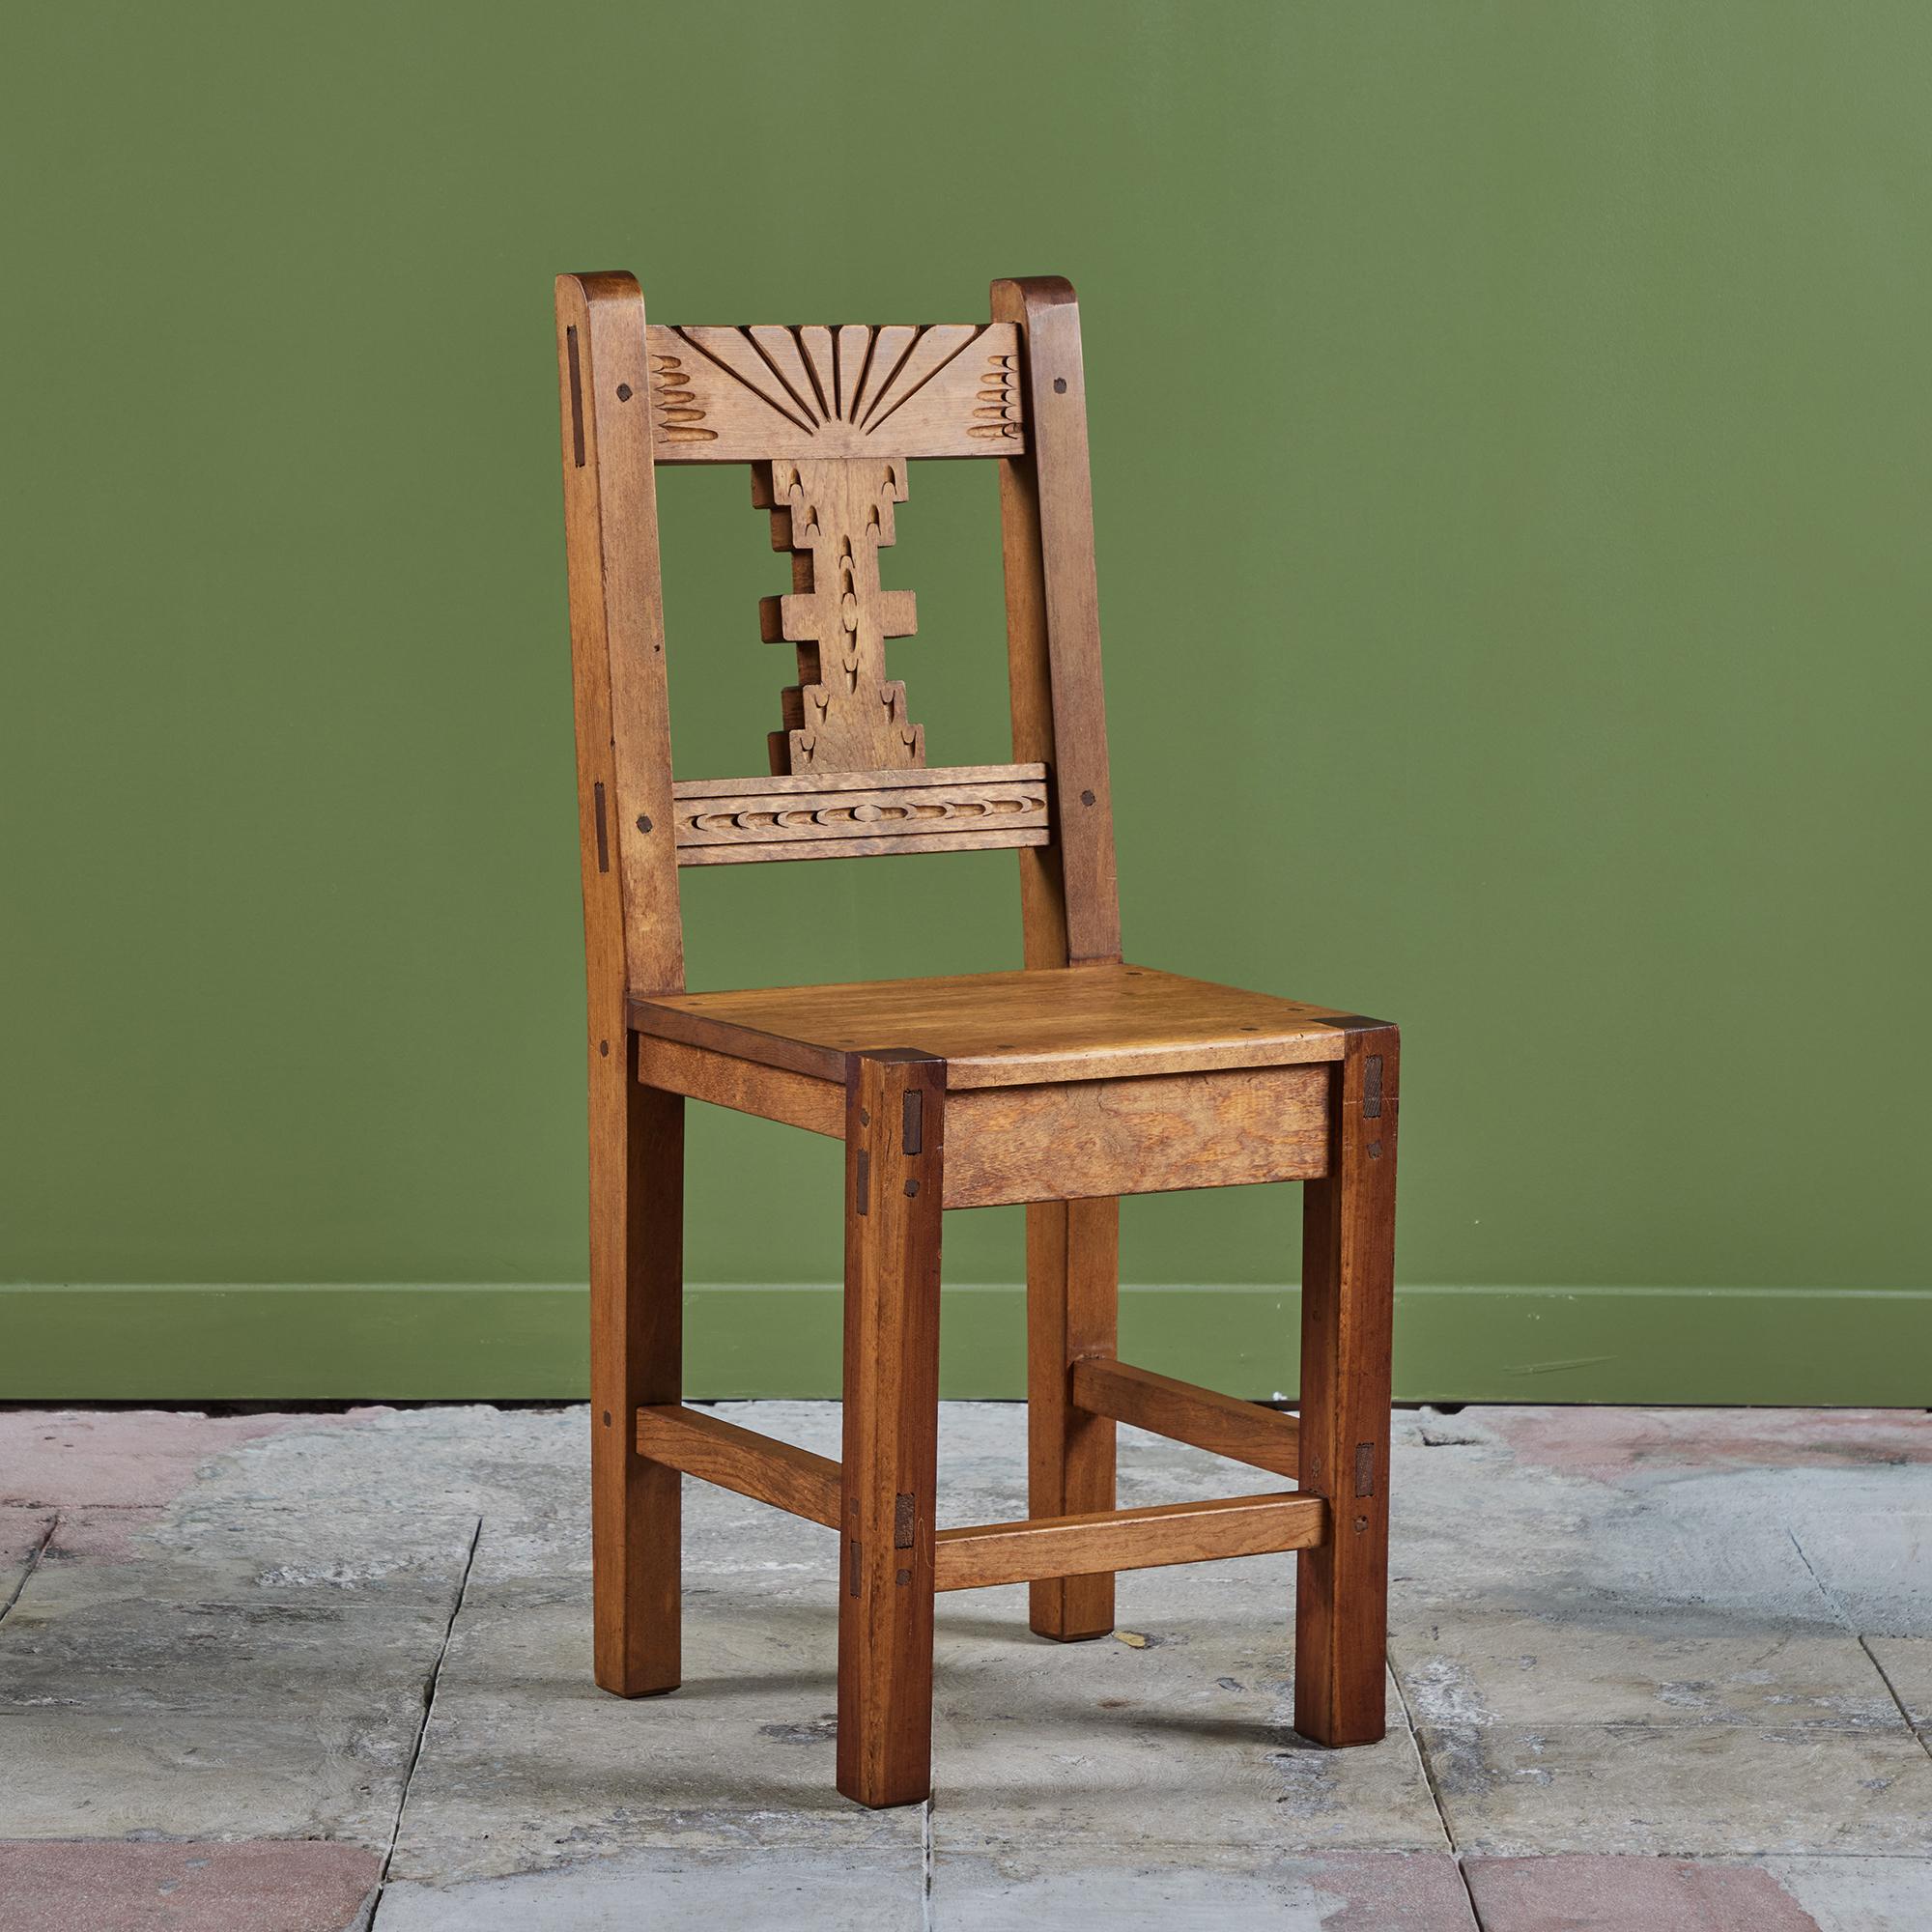 Hand carved Mexican modern side chair. The chair features a mahogany frame with a carved detailing along the front of the backrest. Perfect as an accent chair, desk chair or a set of dining chairs! We have five, please inquire about making a unique